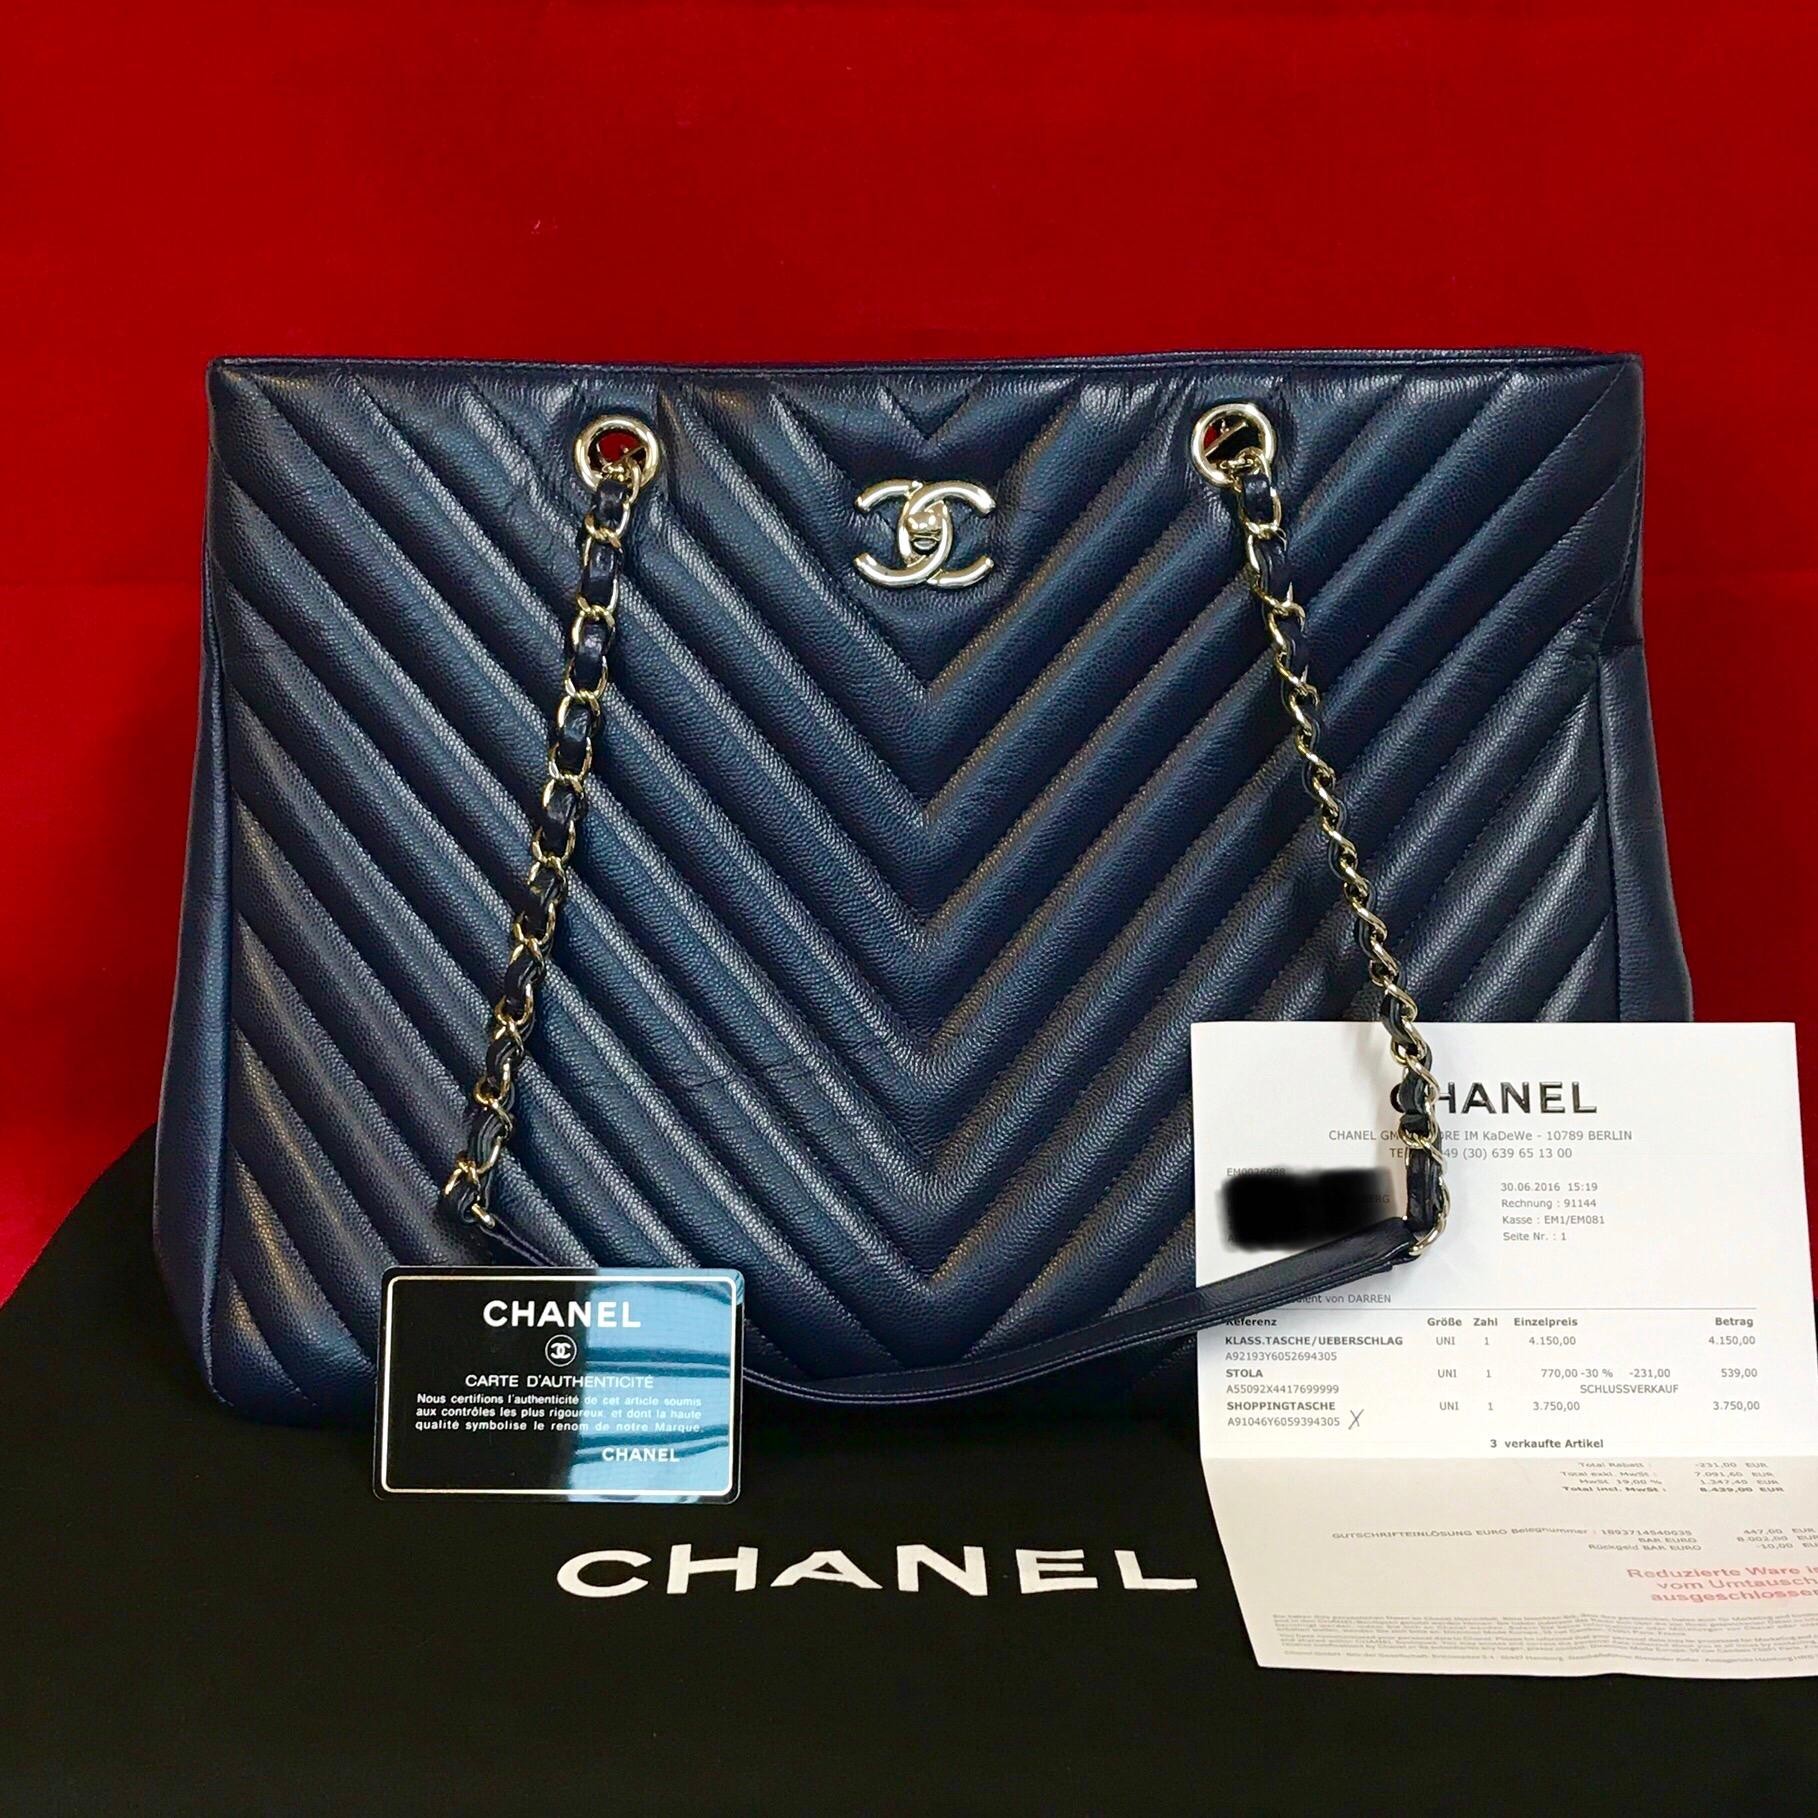 Large CHANEL chevron lambskin shopping bag in navy blue.

The bag is in a very good condition and has minimal signs of use.

The delivery includes:
- Chanel Shopper
- Dustbag
- Warranty card
- Original CHANEL bill of 2016

Dimensions:
15 x 10,5 x 6